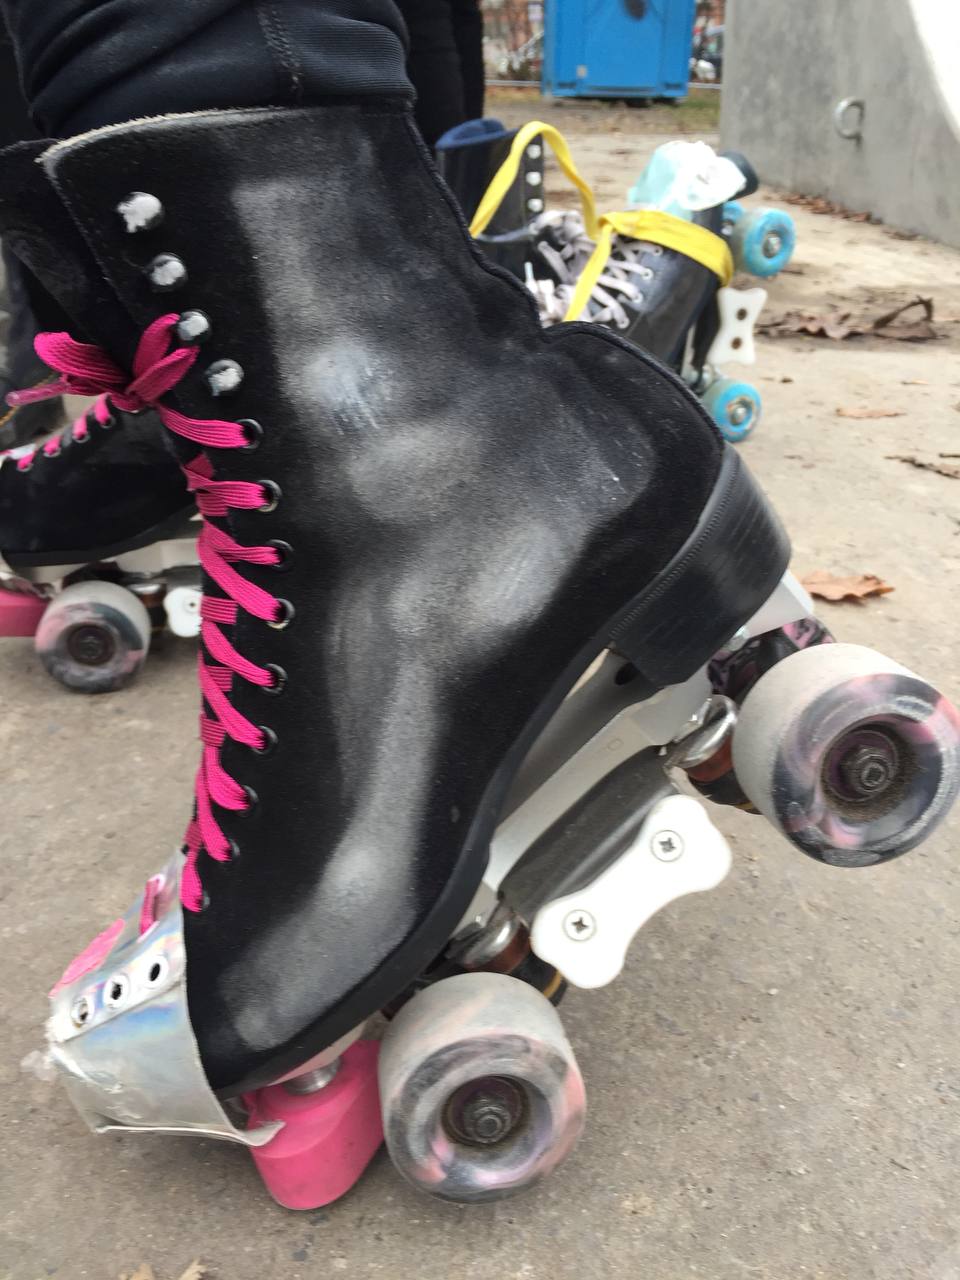 black rollerblades with a dusty white outline on them that looks like a skeleton foot x-ray